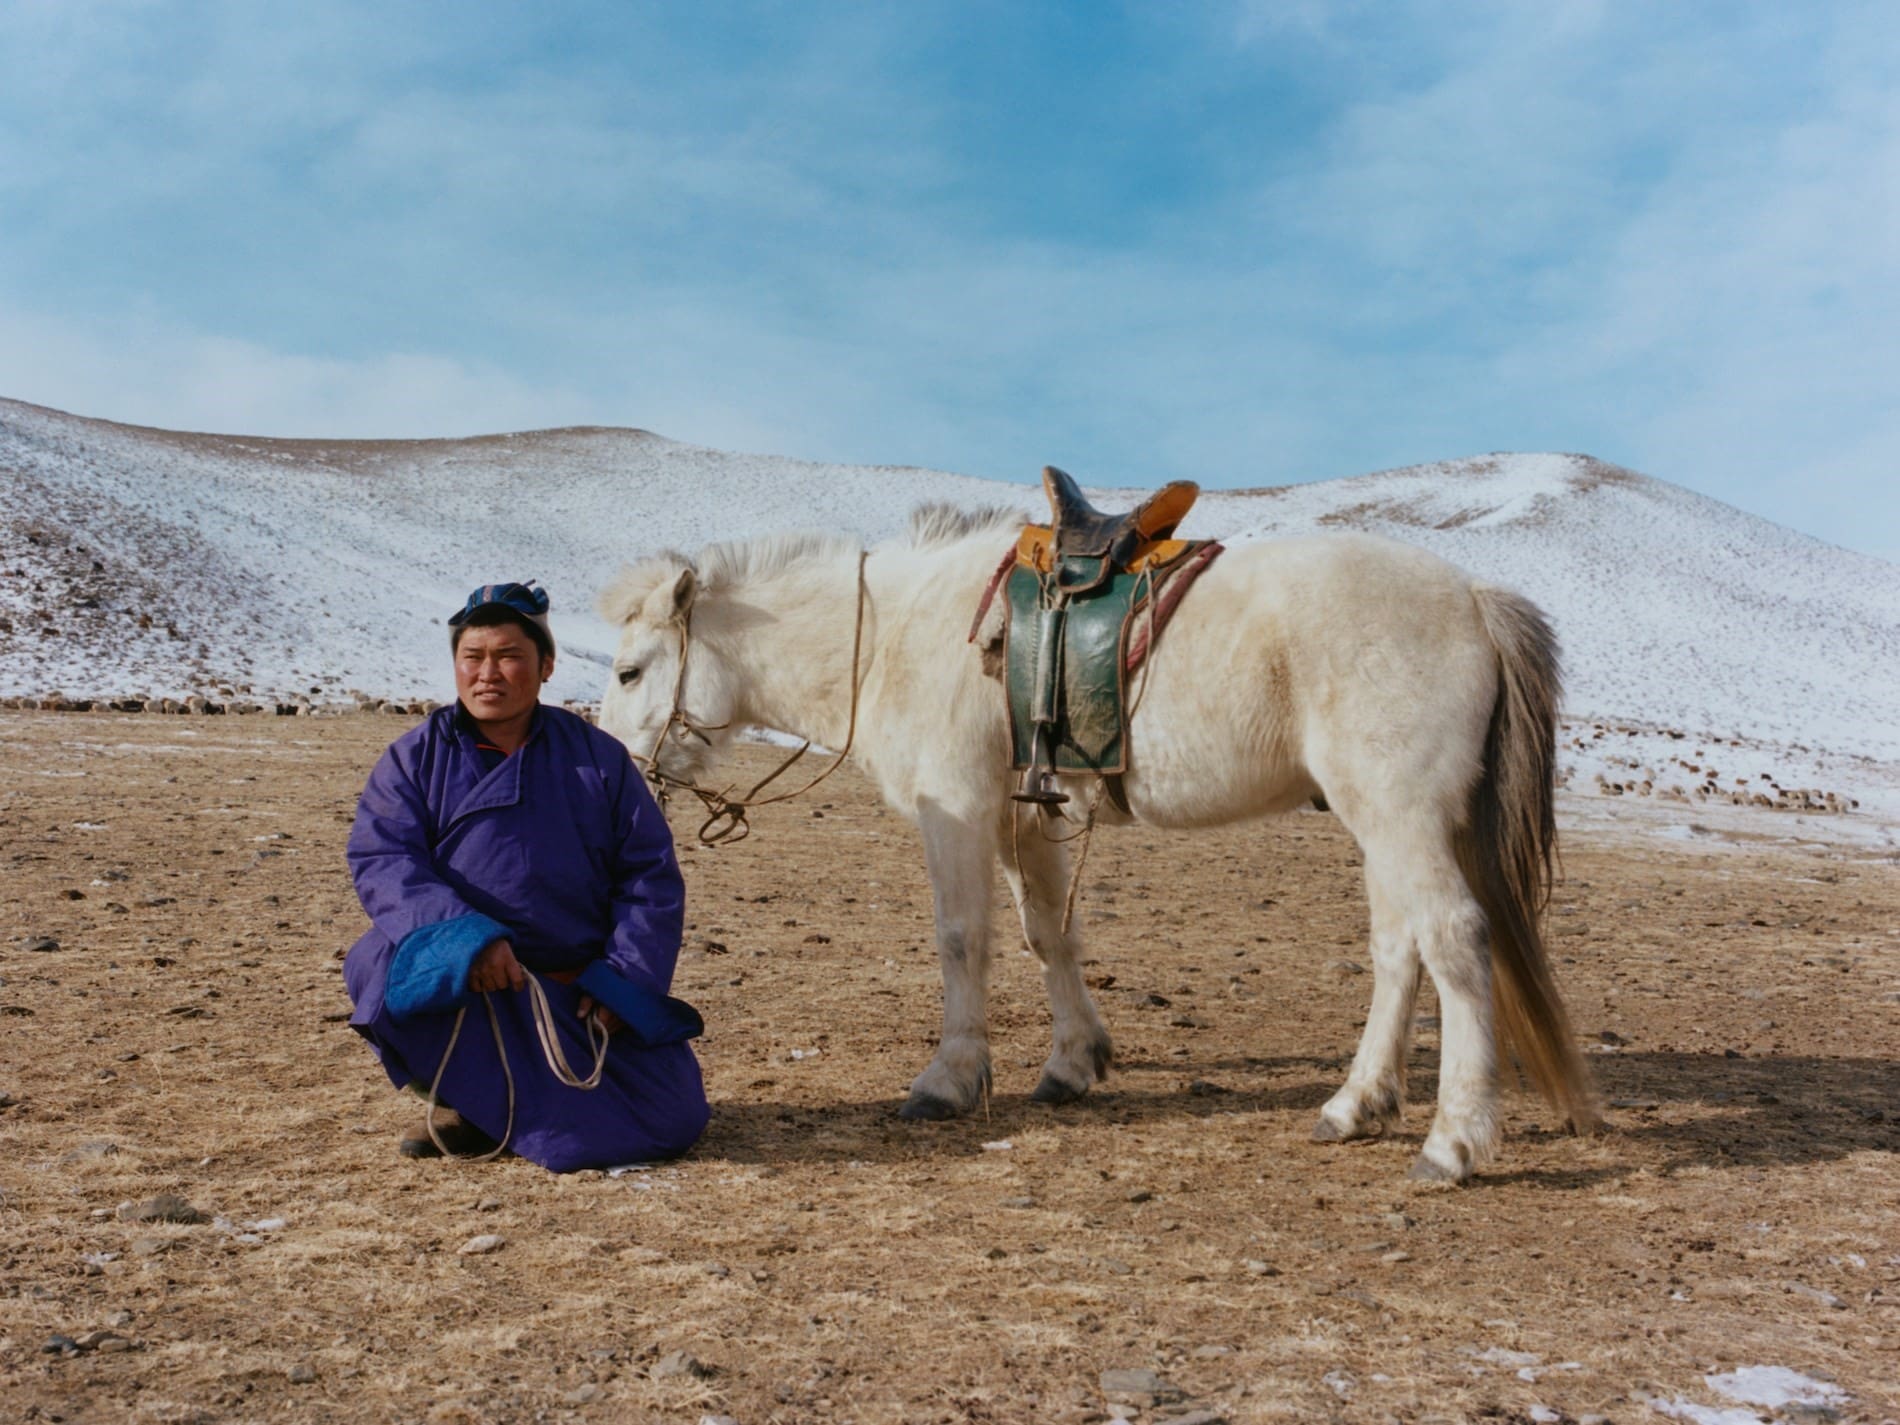 Coco Capitan | A man in a blue and purple outfit sits next to a white pony on earthy terrain, with white mountains and blue sky in the background